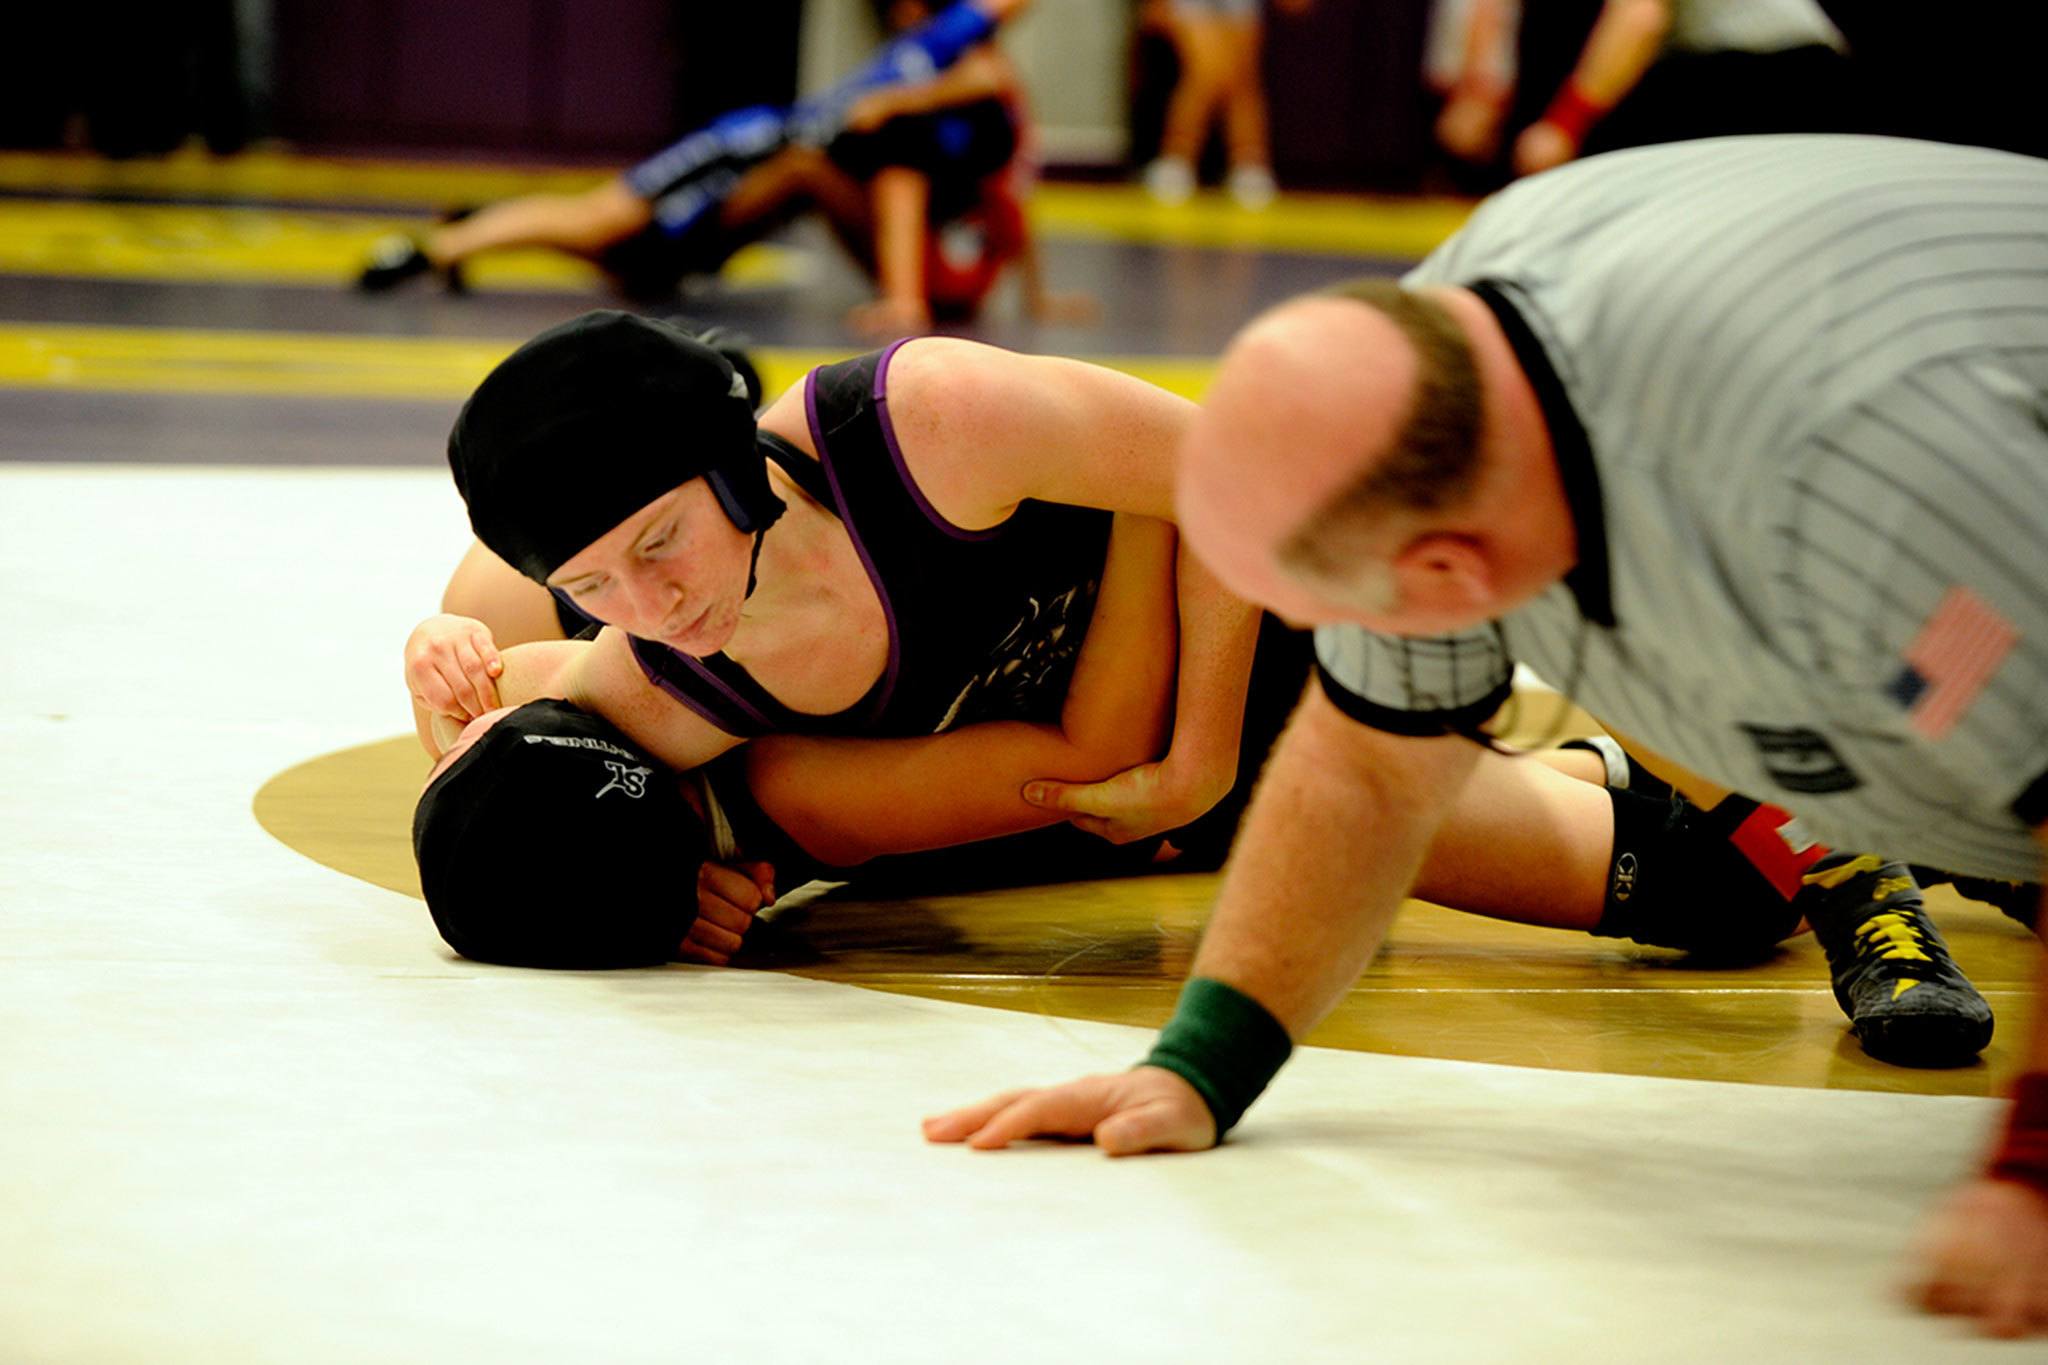 Sequim’s Kiara Pierson, 120 pounds, pins Anna Schlueb of Spanaway Lake in 1:02 on Feb. 4, in Sequim High School for the sub-regional girls wrestling tournament for District C of West Central District III. Pierson took second in the tournament and competes in regionals on Feb. 10-11 at Decatur High School in Federal Way.